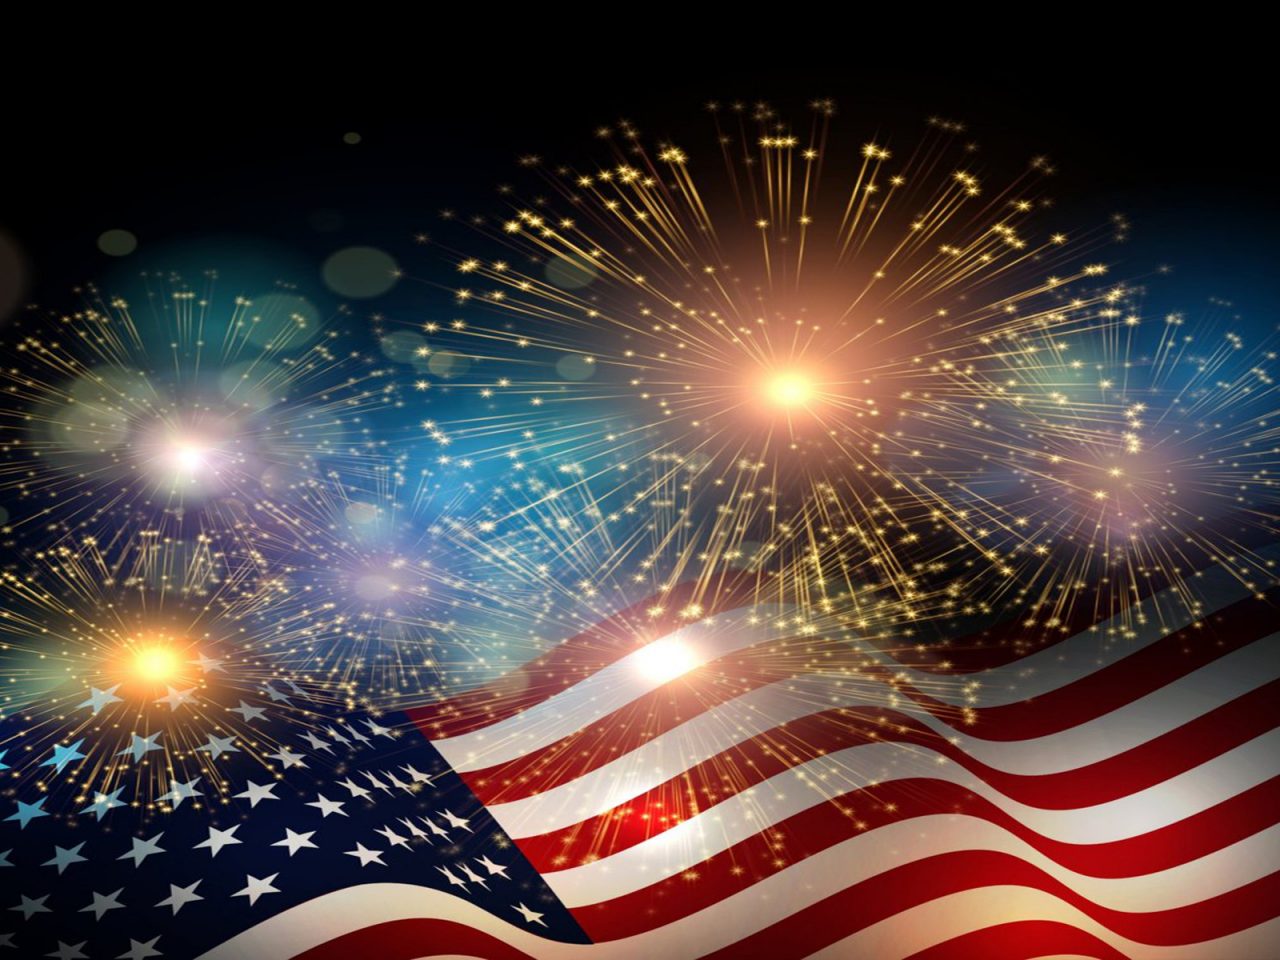 4 of july wallpaper,fireworks,sky,flag of the united states,flag,event